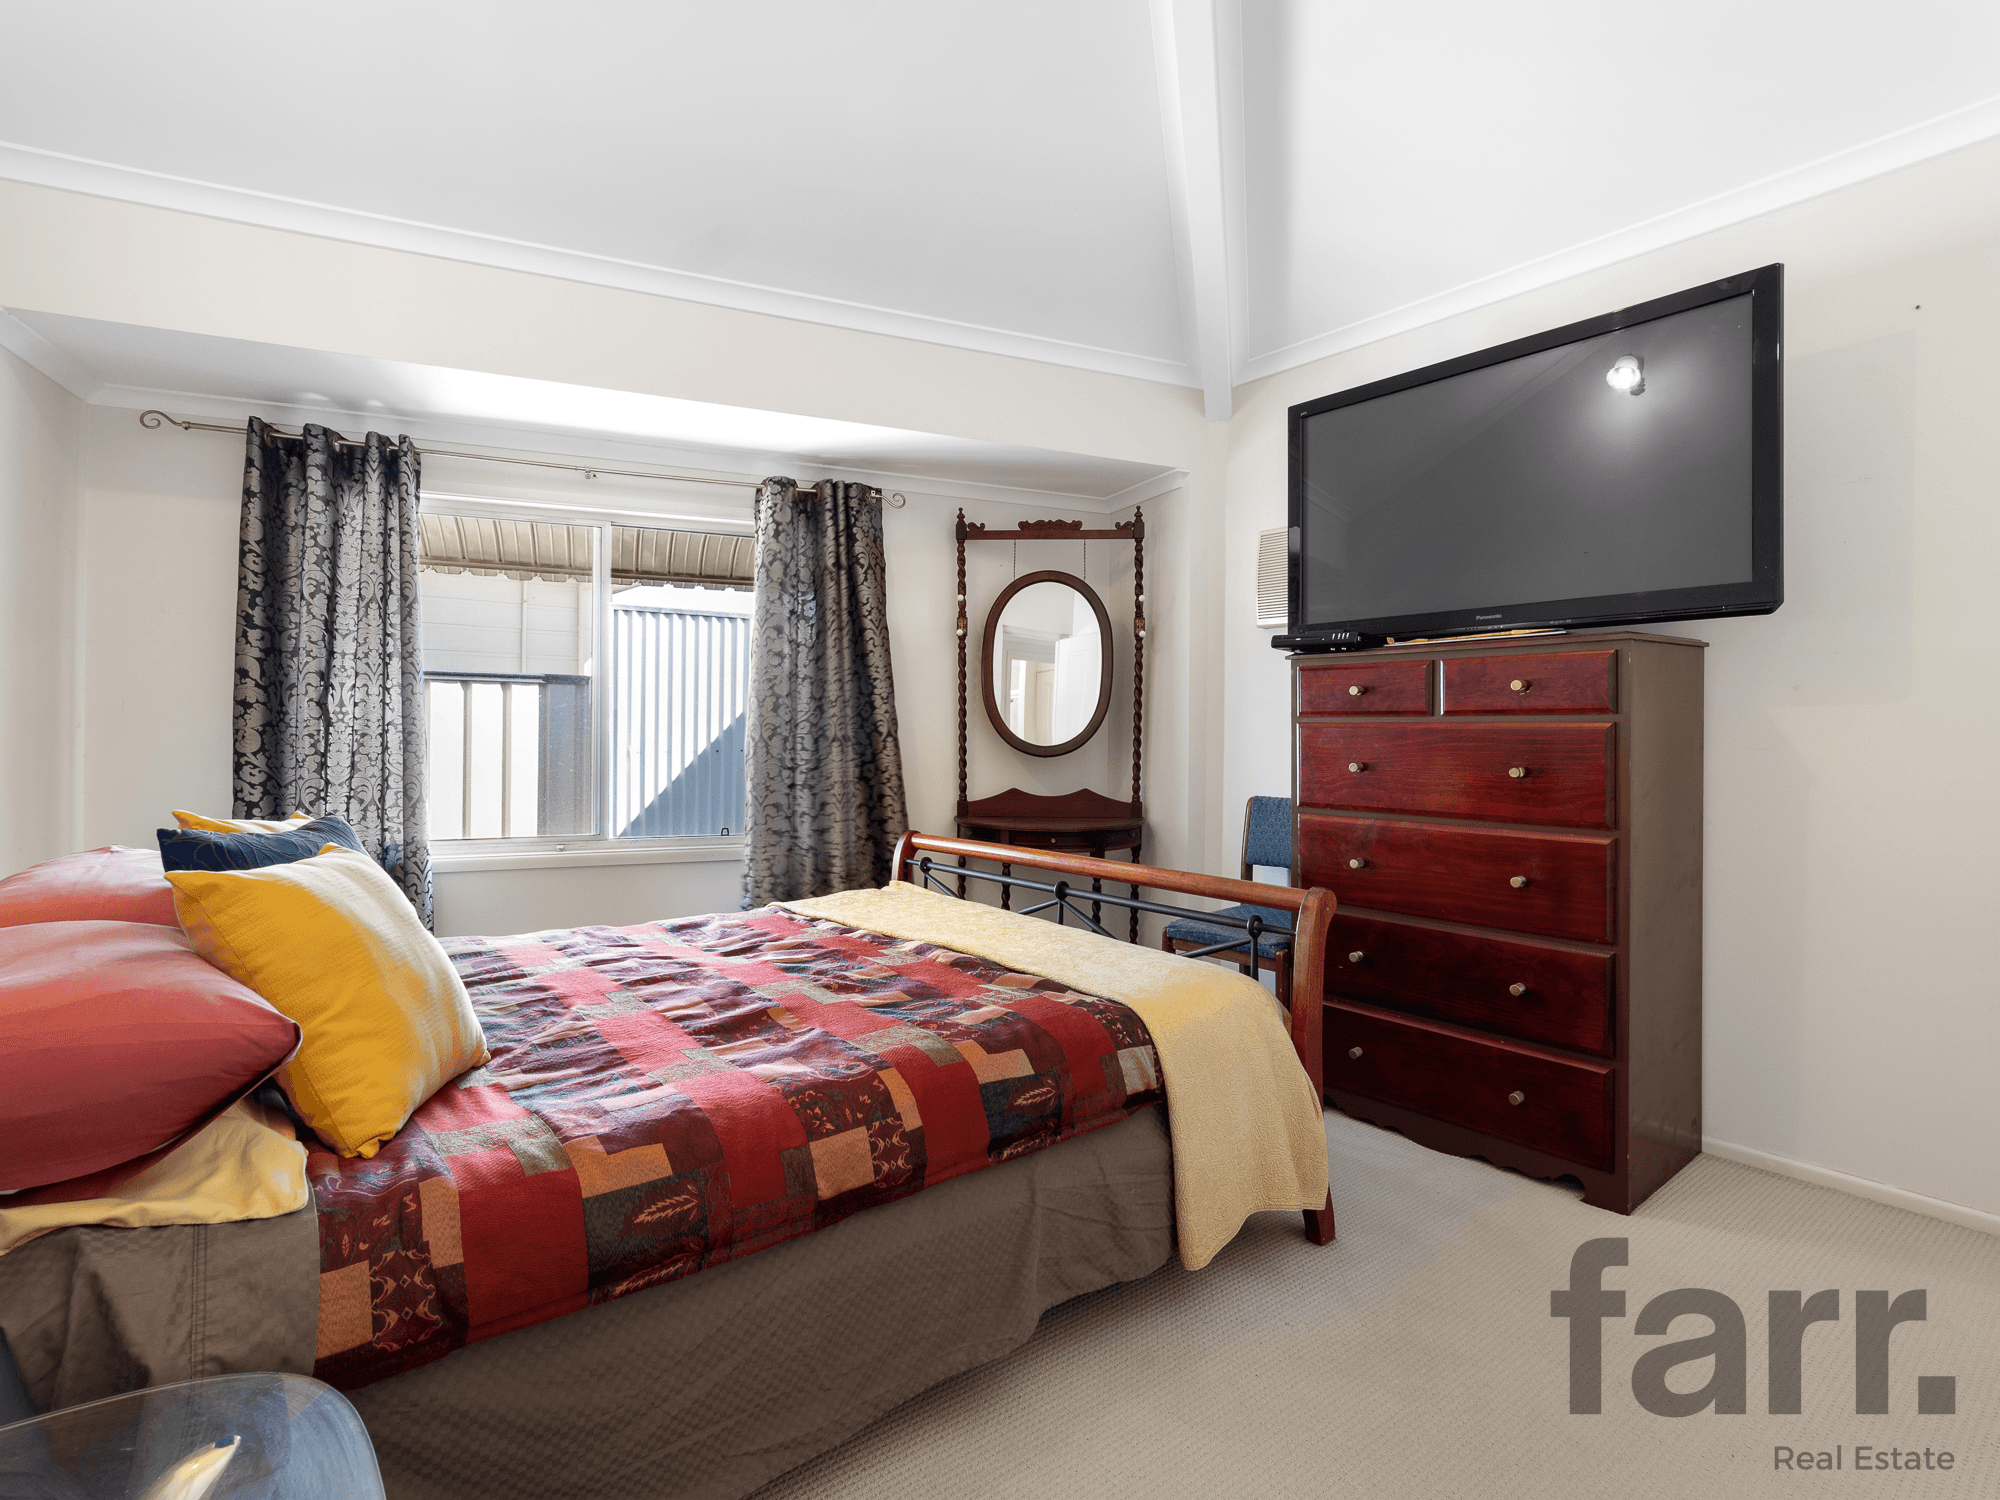 7/22 Hansford Road, COOMBABAH, QLD 4216